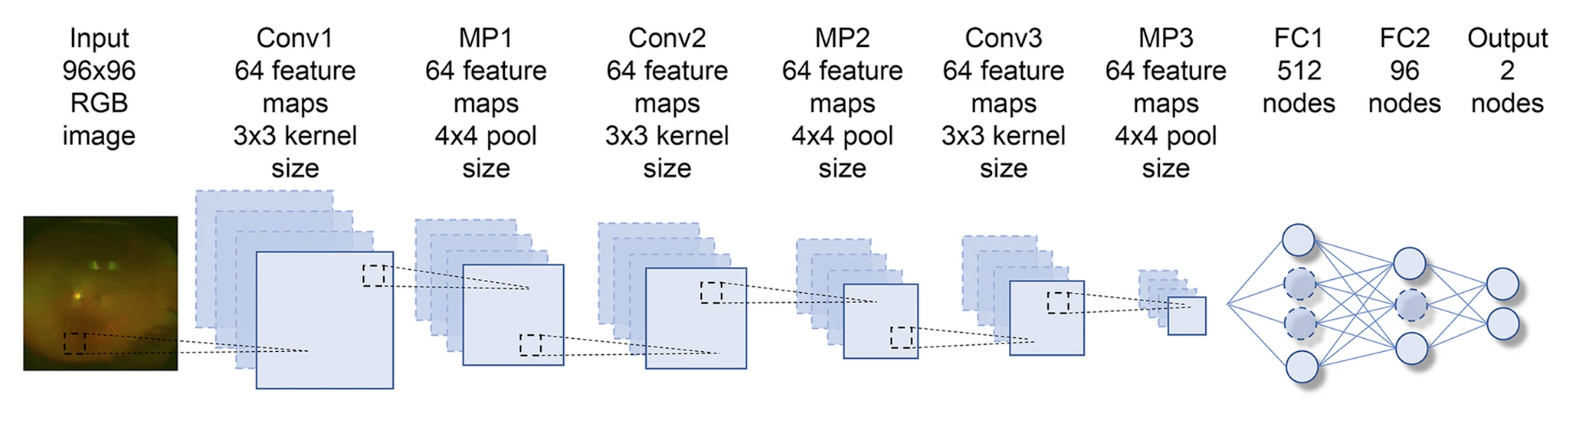 CNN architecture used. The Input is represented by the RGB 96x96 pixel image. Each of the convolutional layers (Conv1–3) is followed by an activation function layer (ReLU), pooling layers (MP1–3), and two fully connected layers (FC1, FC2).